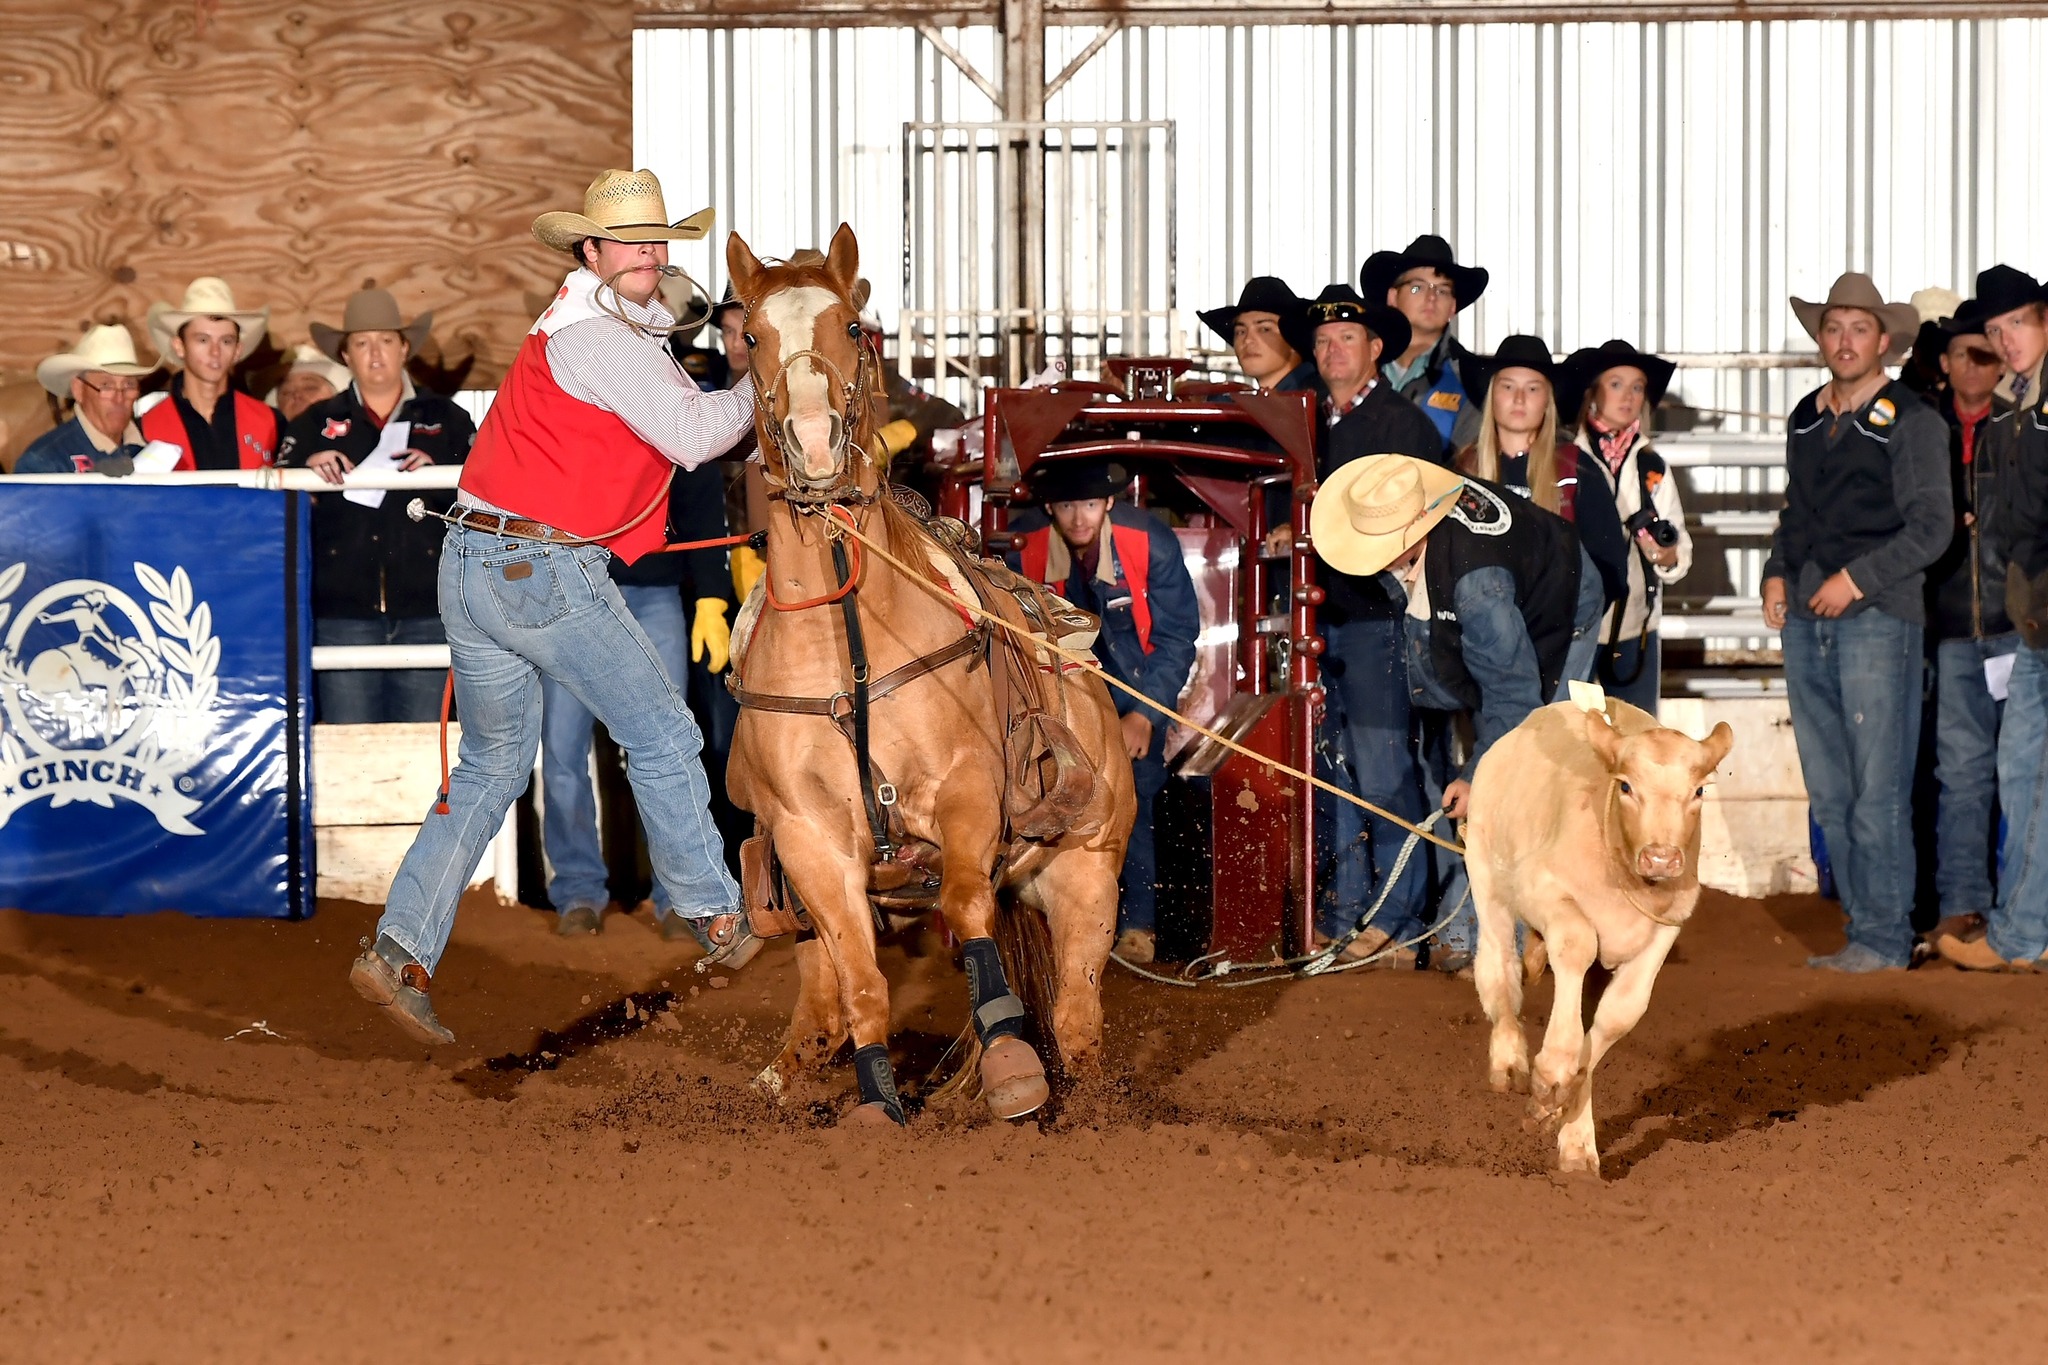 Coffeyville Community College and CCC Rodeo are saddened by the loss of our student and athlete, Colton Bond